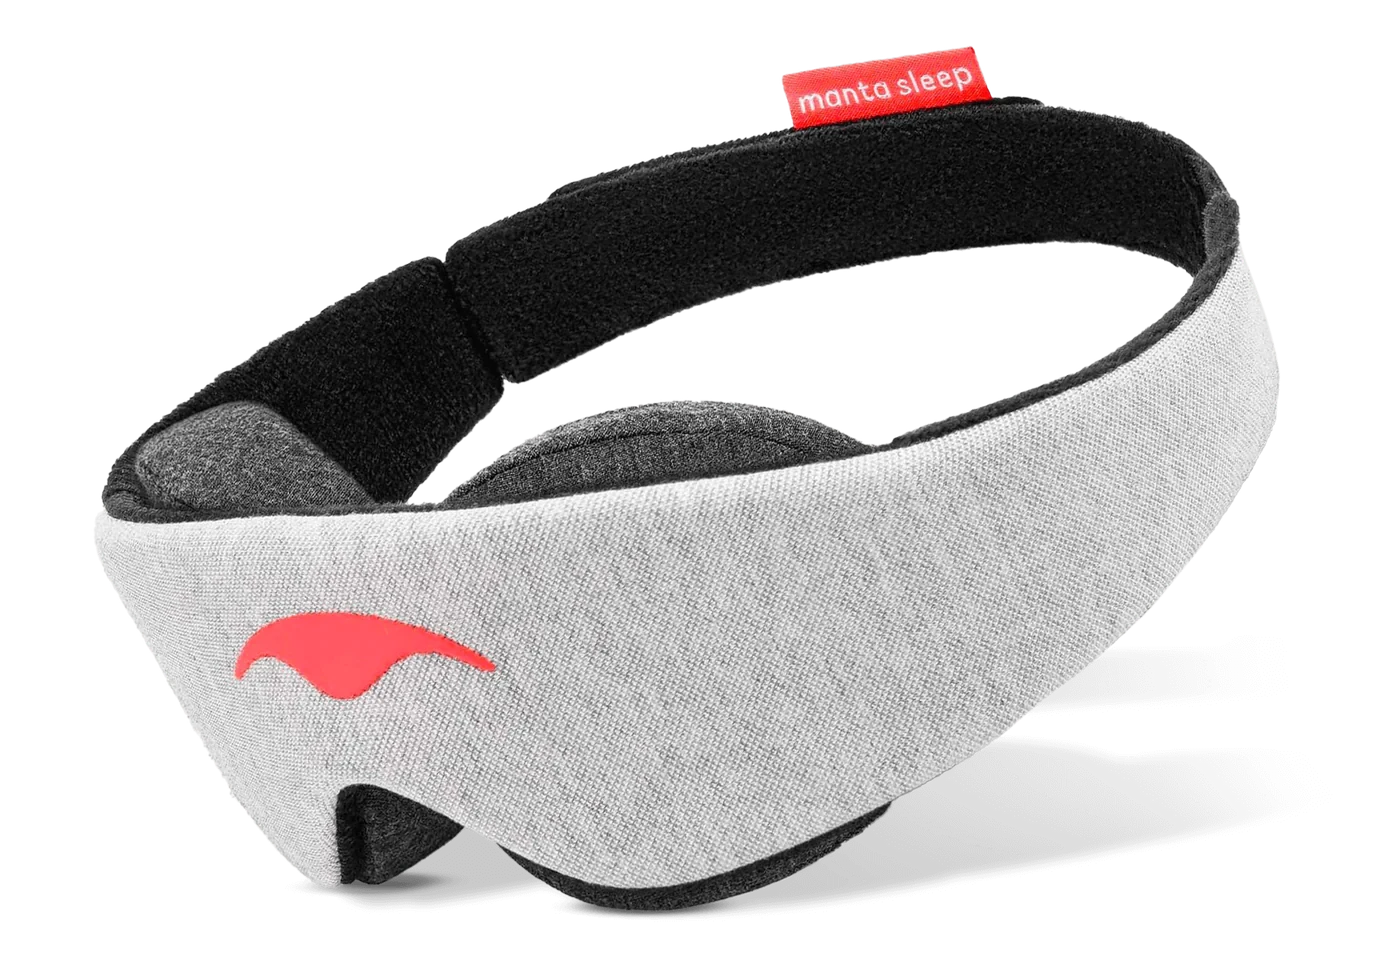 A gray sleep mask with eye cups for stomach sleeping.